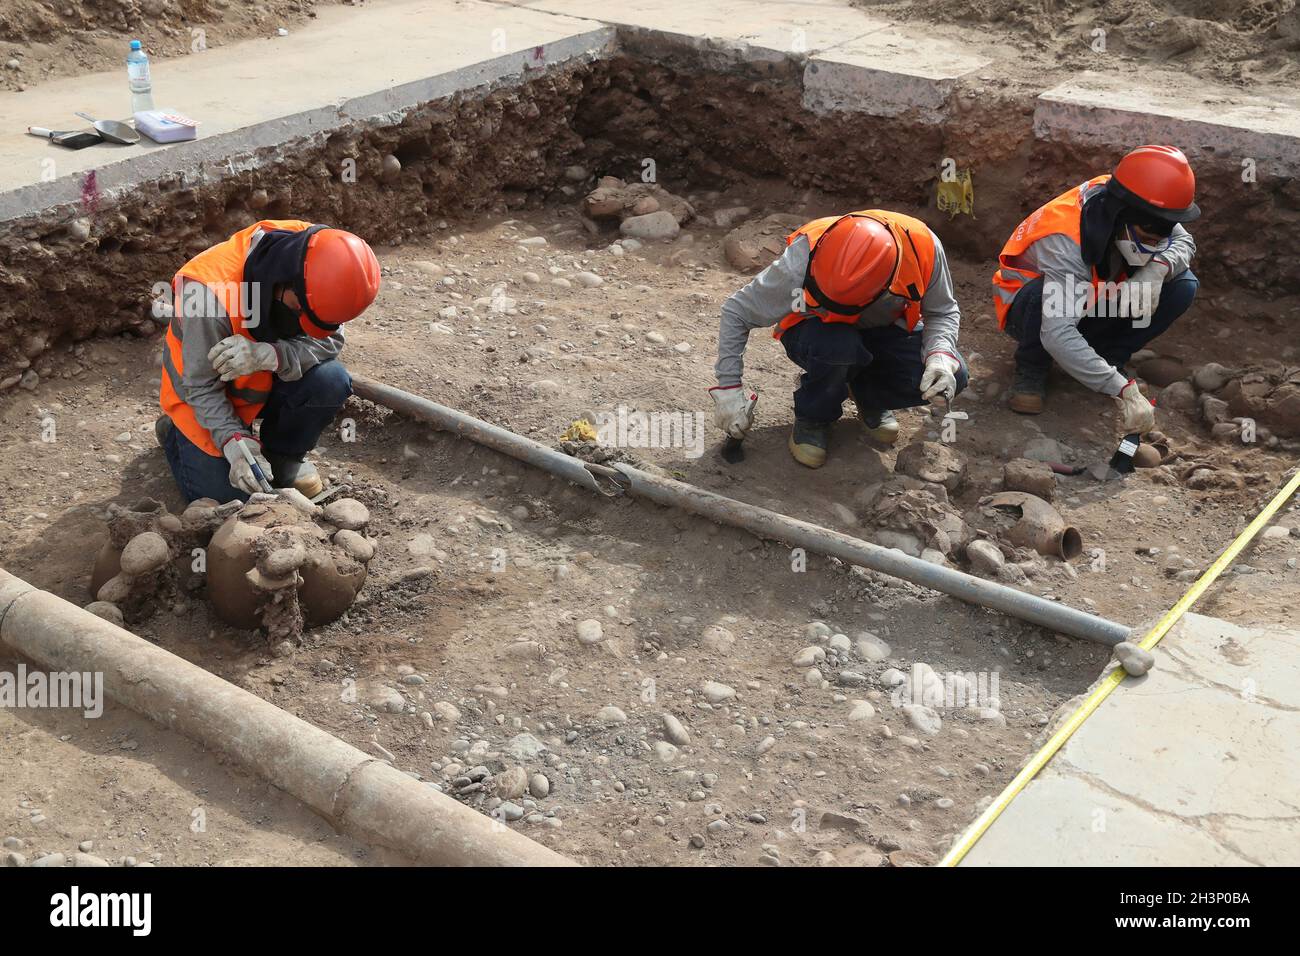 Archeologists work at a site where artifacts and human remains dating back to pre-Hispanic times were found underneath a street during an infrastructure project, in Lima, Peru October 29, 2021. REUTERS/Sebastian Castaneda Stock Photo